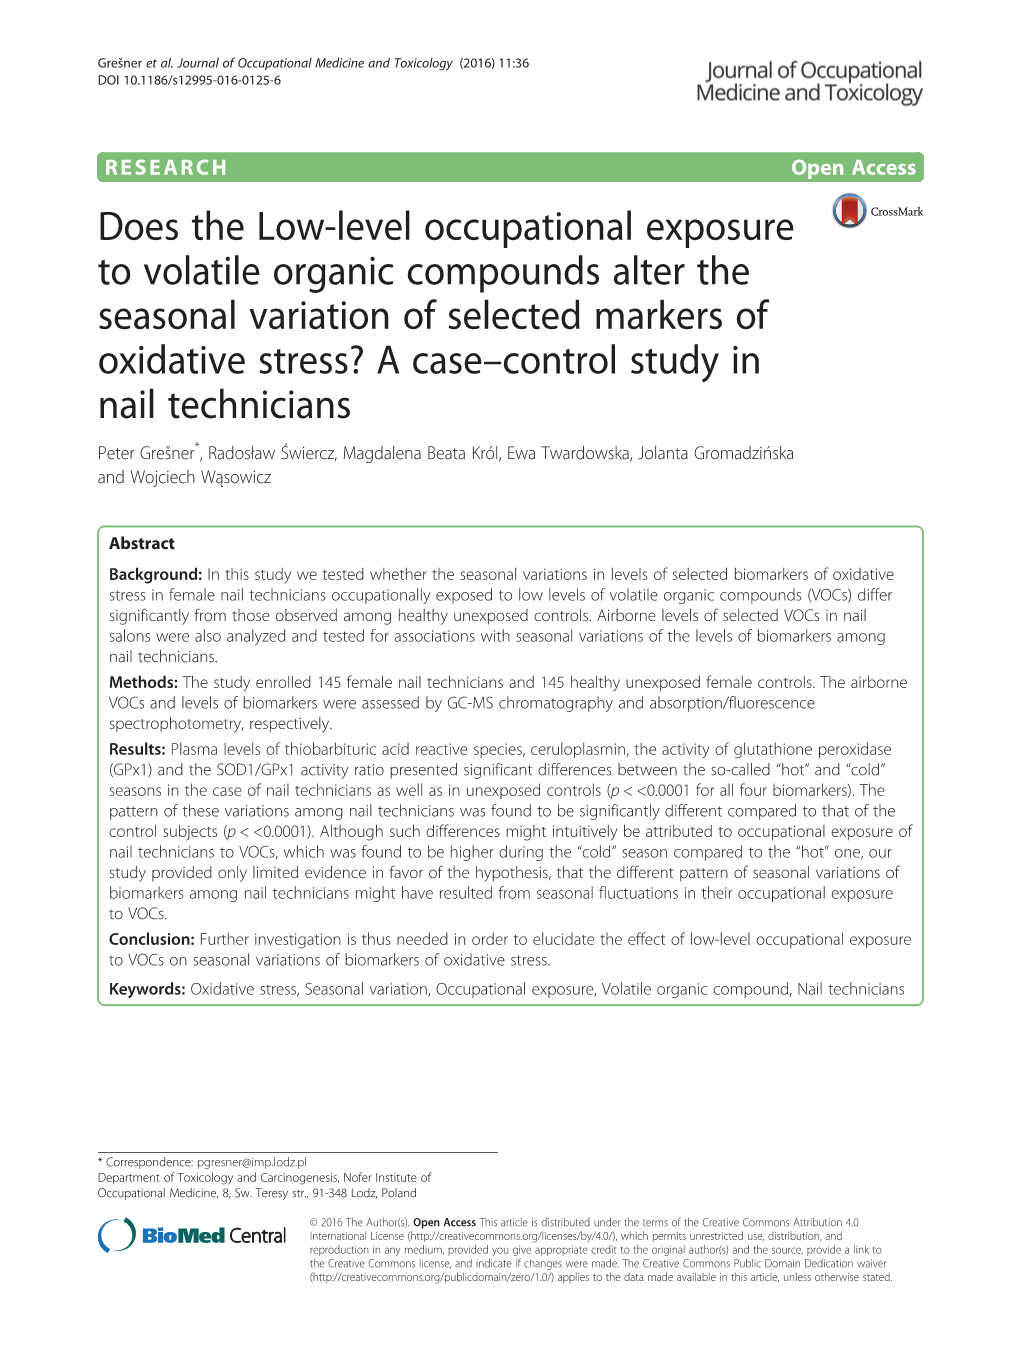 Does the Low-Level Occupational Exposure to Volatile Organic